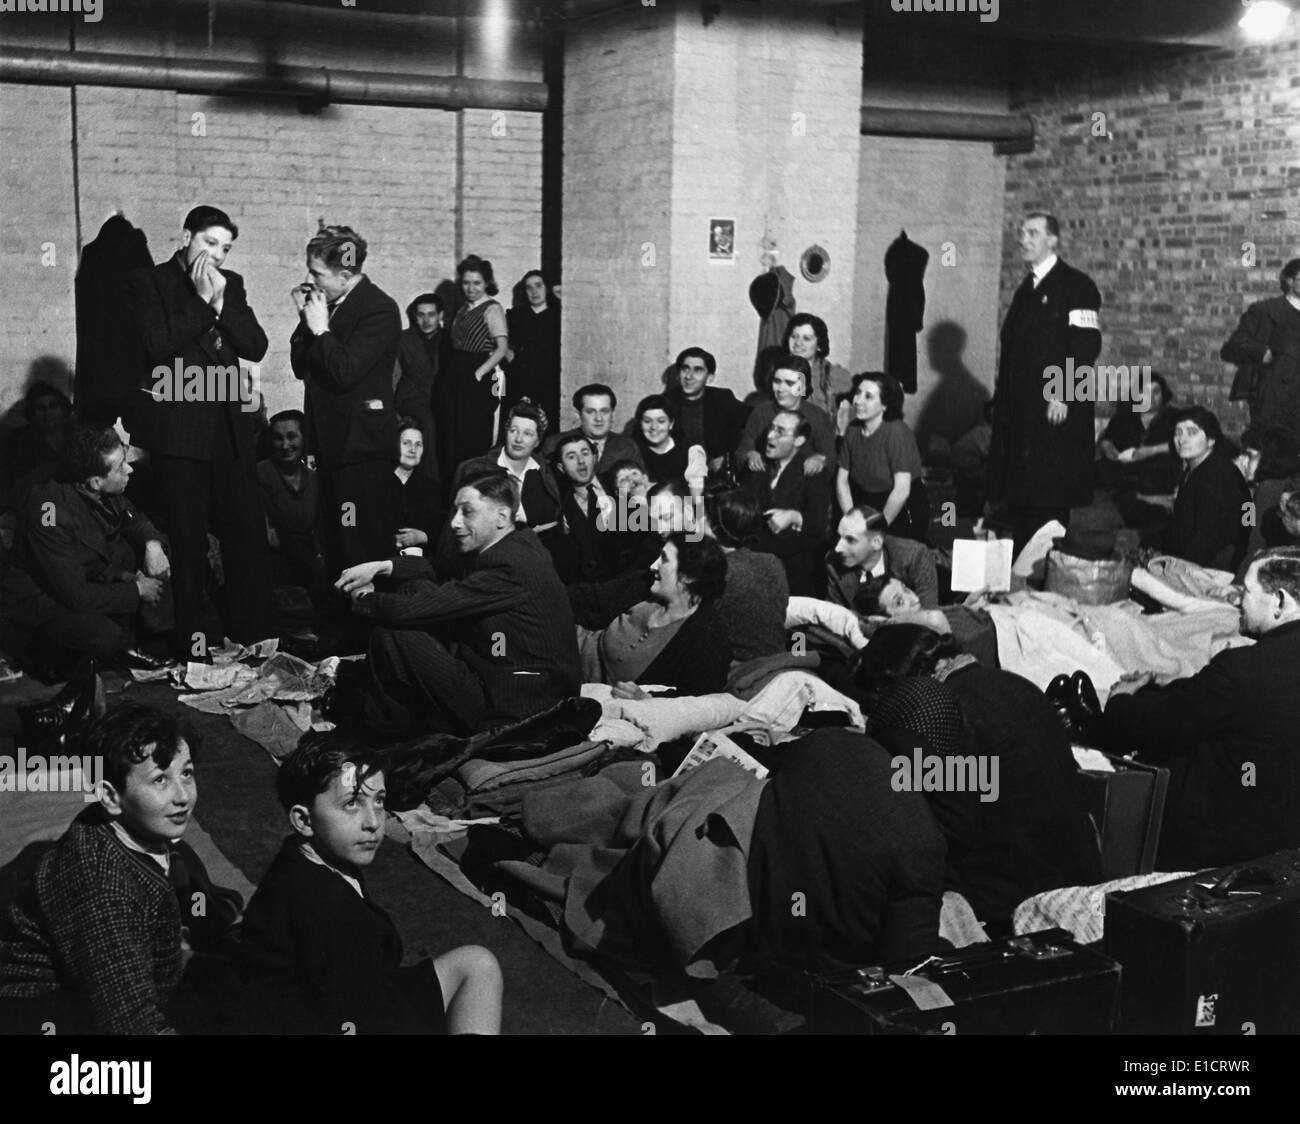 World War 2, Battle of Britain. London civilians in a West End bomb shelter during the Blitz. Ca. 1940-41. (BSLOC 2013 11 98) Stock Photo